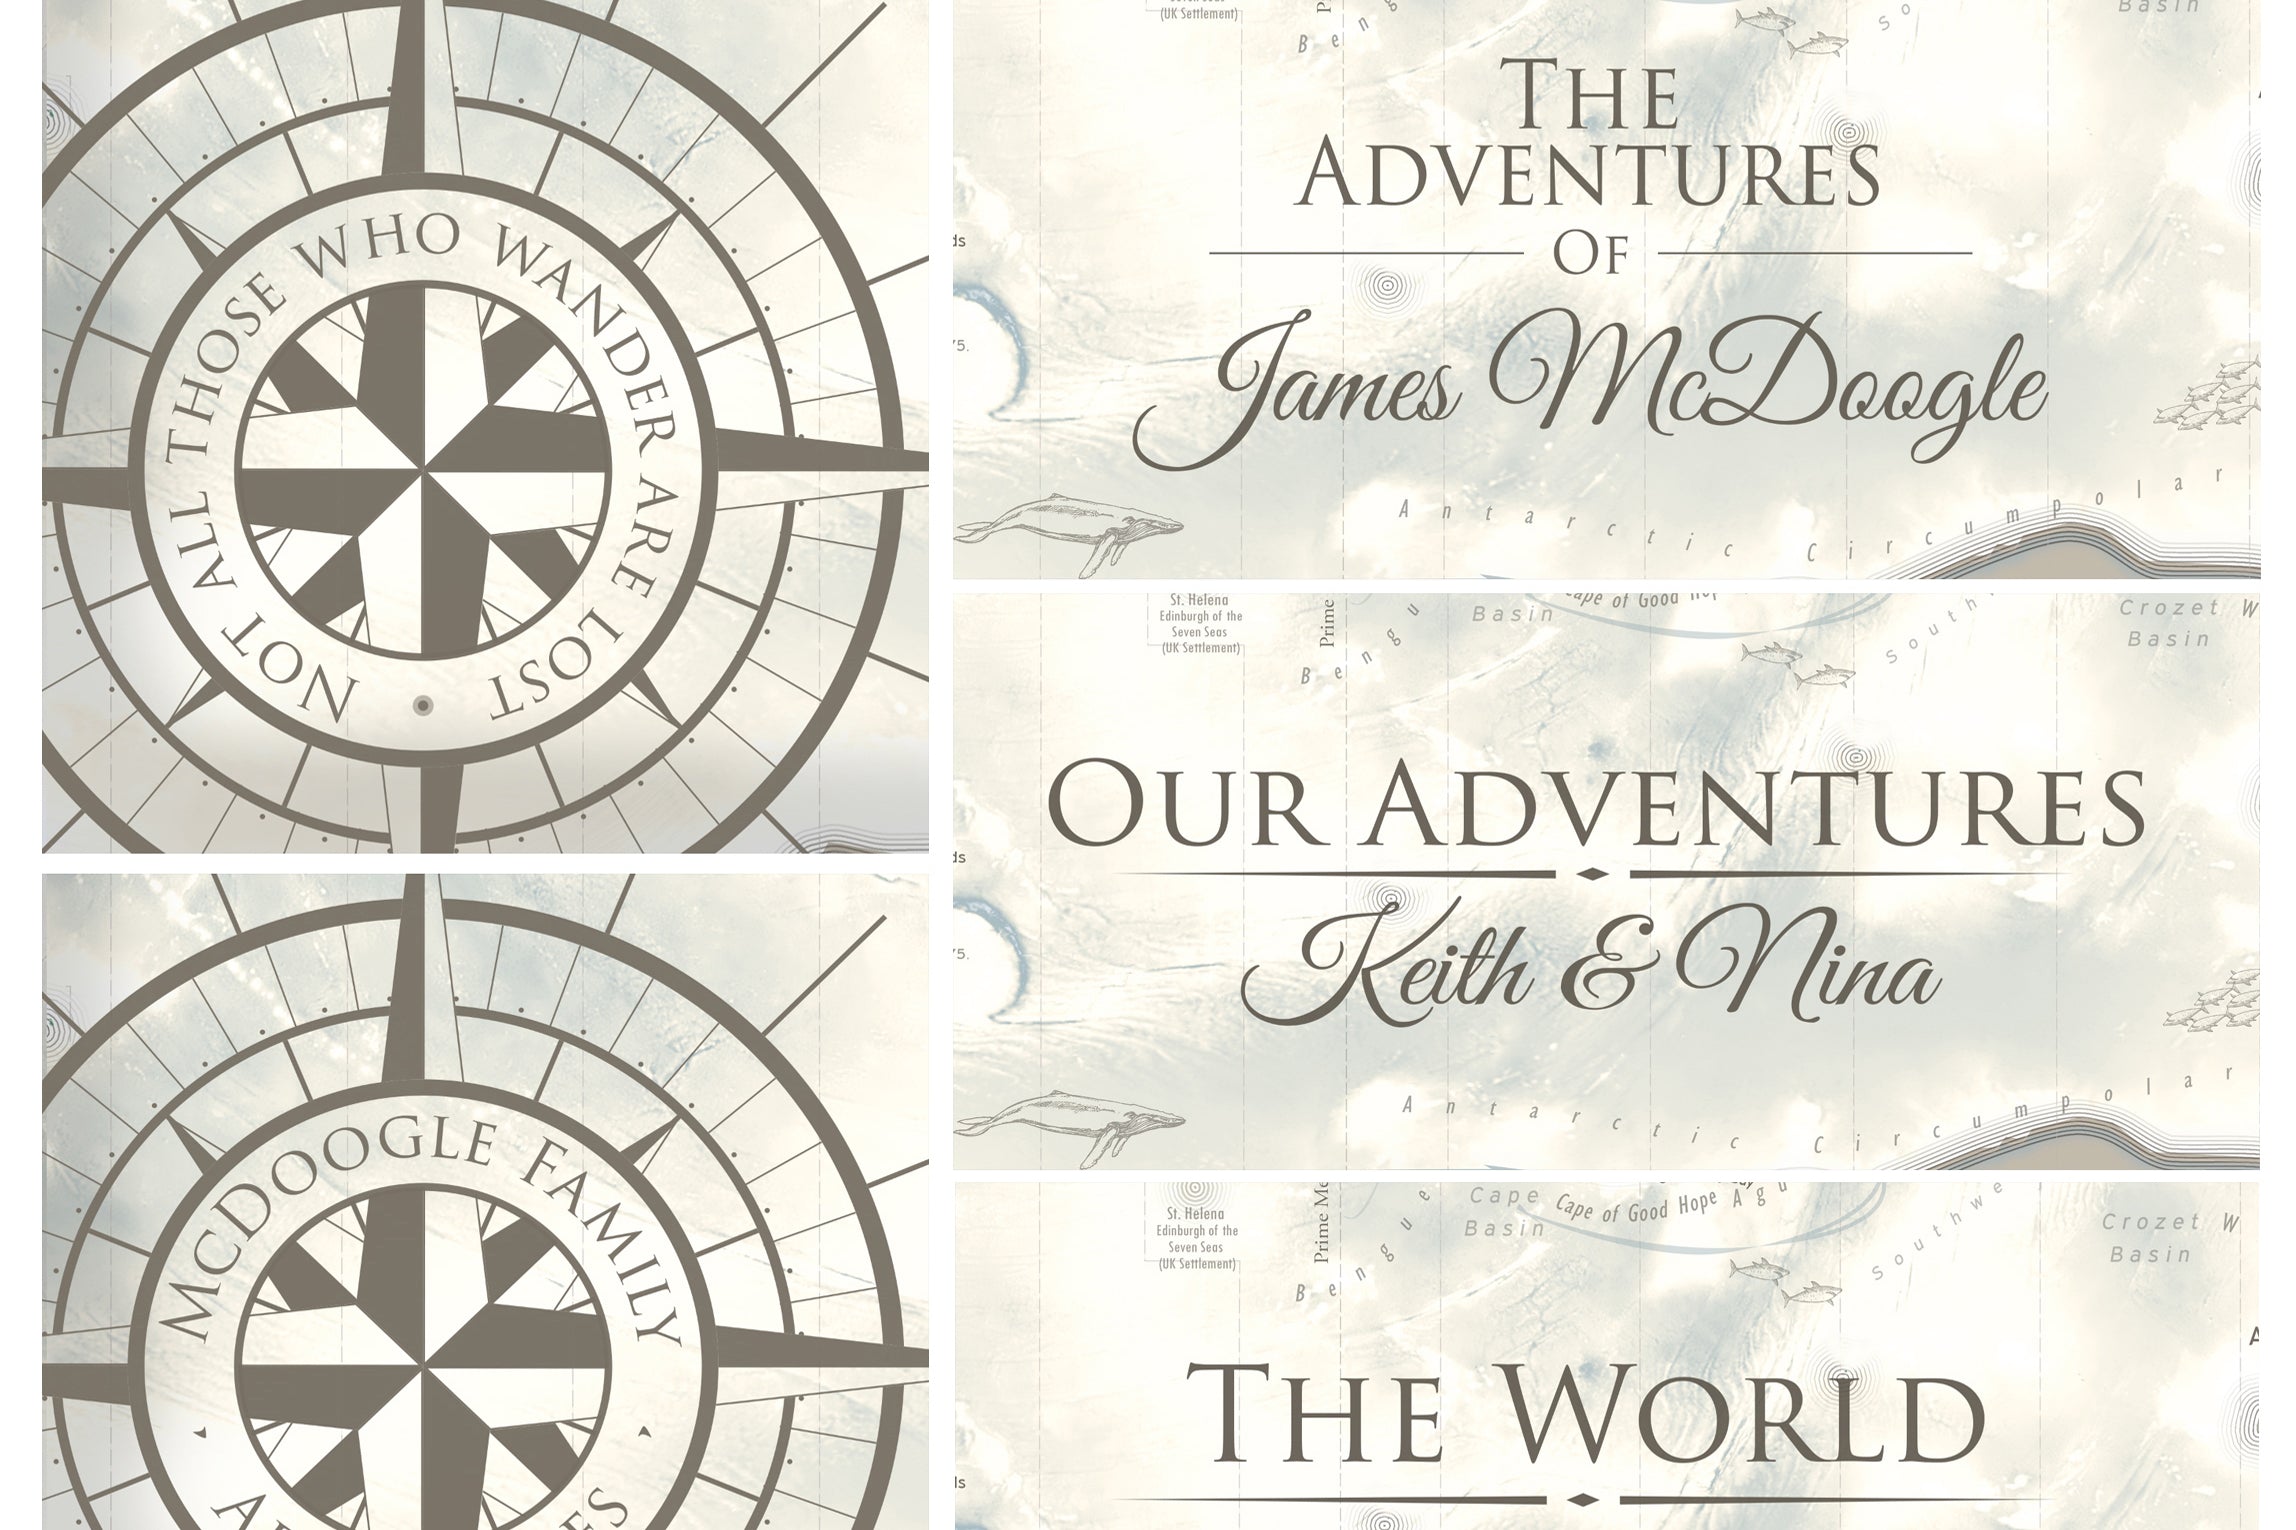 Custom options for personalizing your world map pin board - legend, titles, and compass